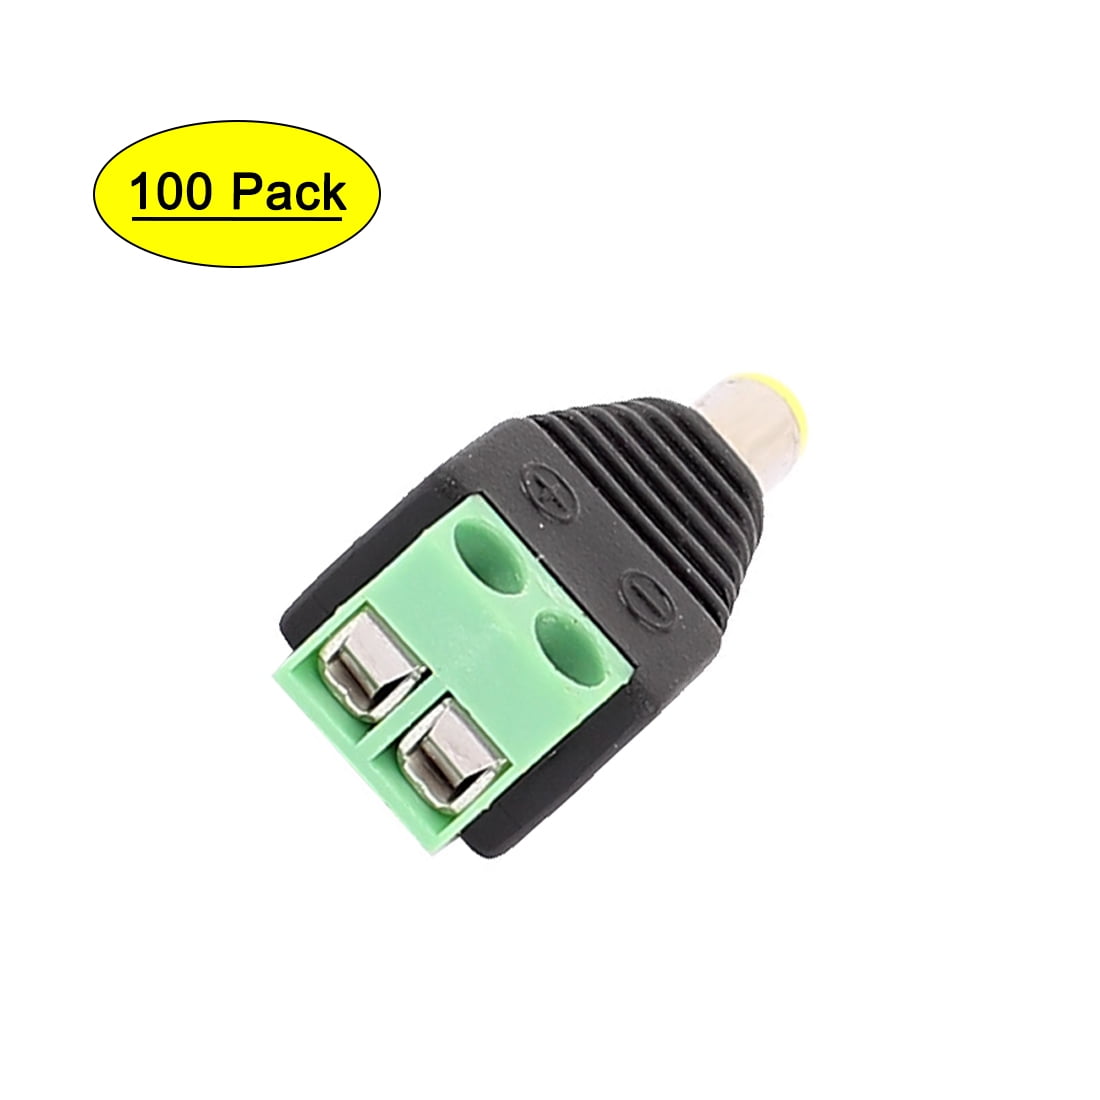 100pcs 5.5 x 2.1mm DC Power Cable Male Plug Connector Adapter Soldering Plastic 